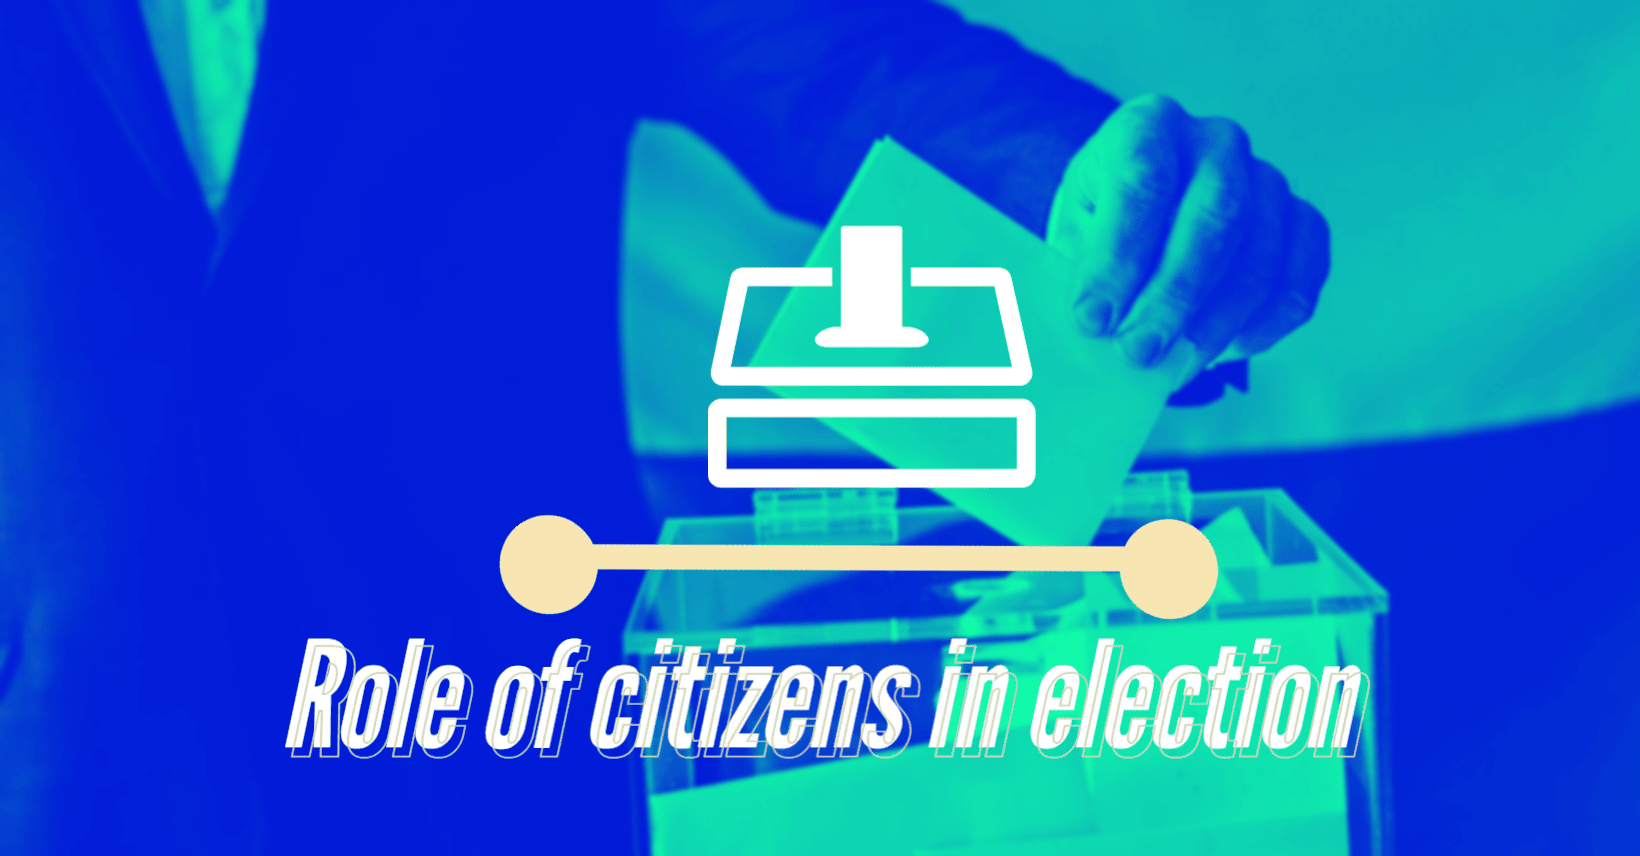 What are the roles of citizen in election